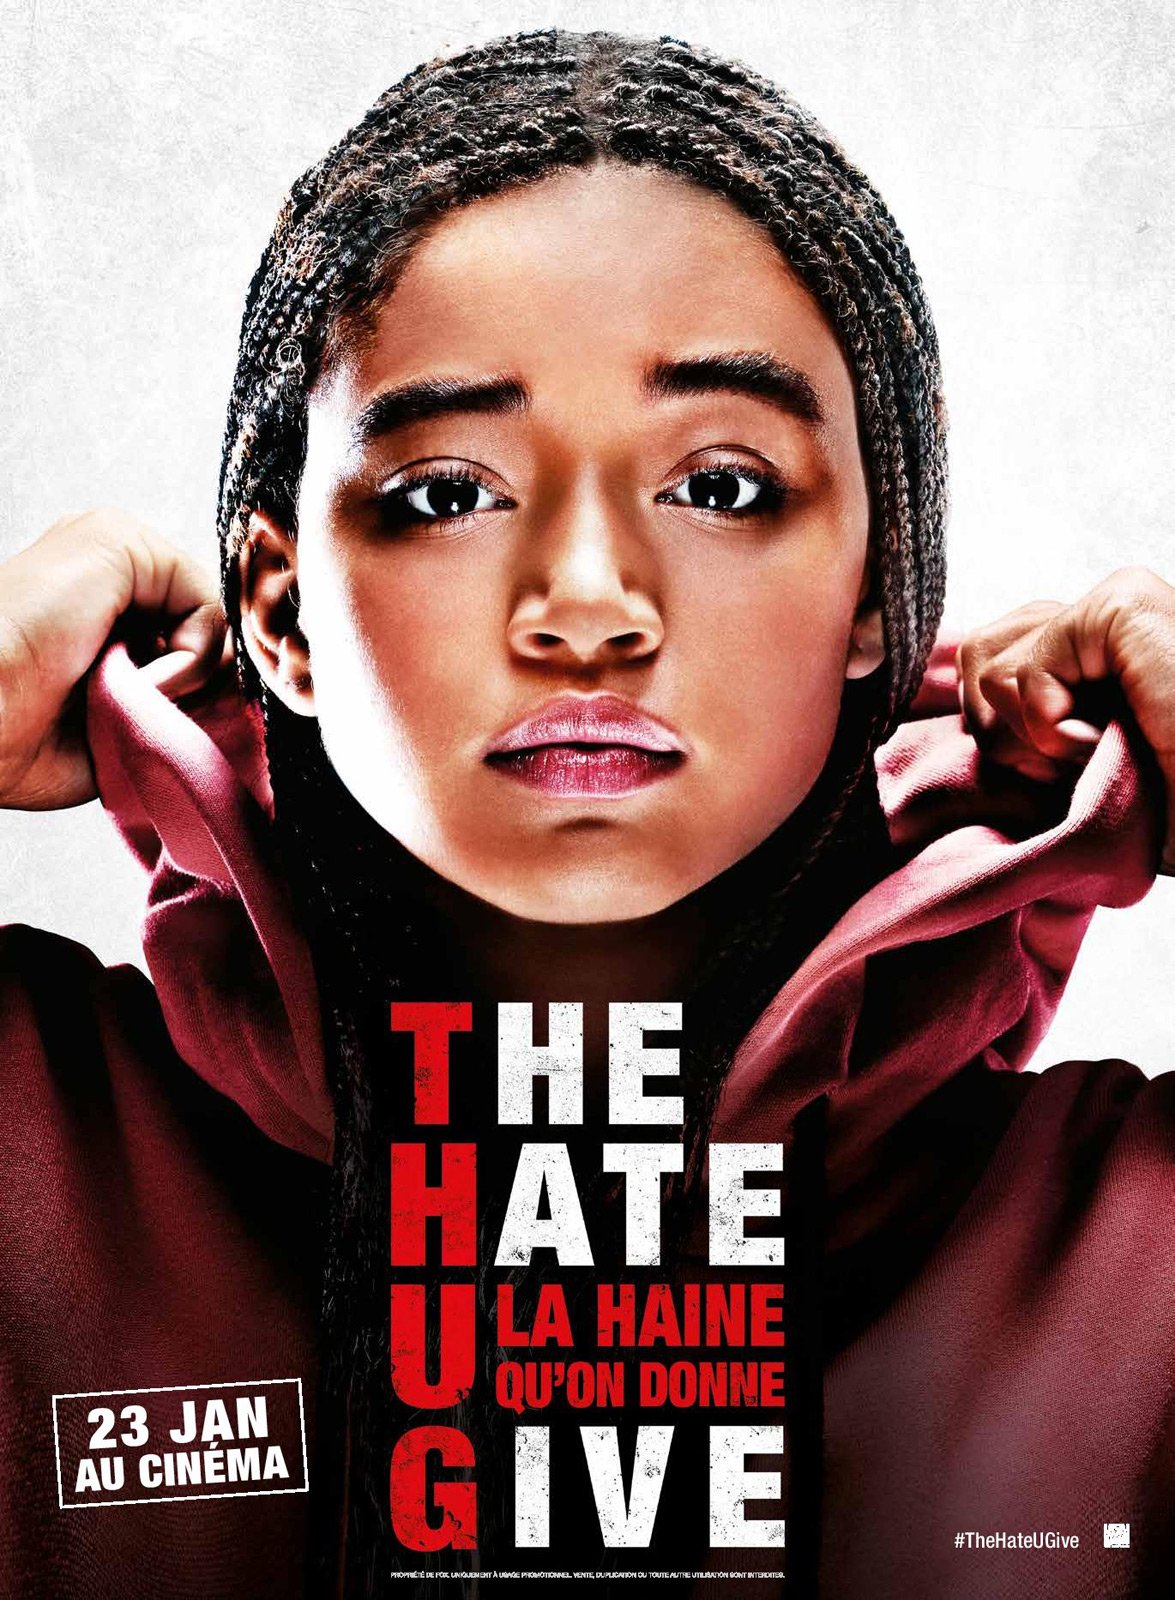 The Hate U Give – La Haine qu’on donne streaming vf gratuit